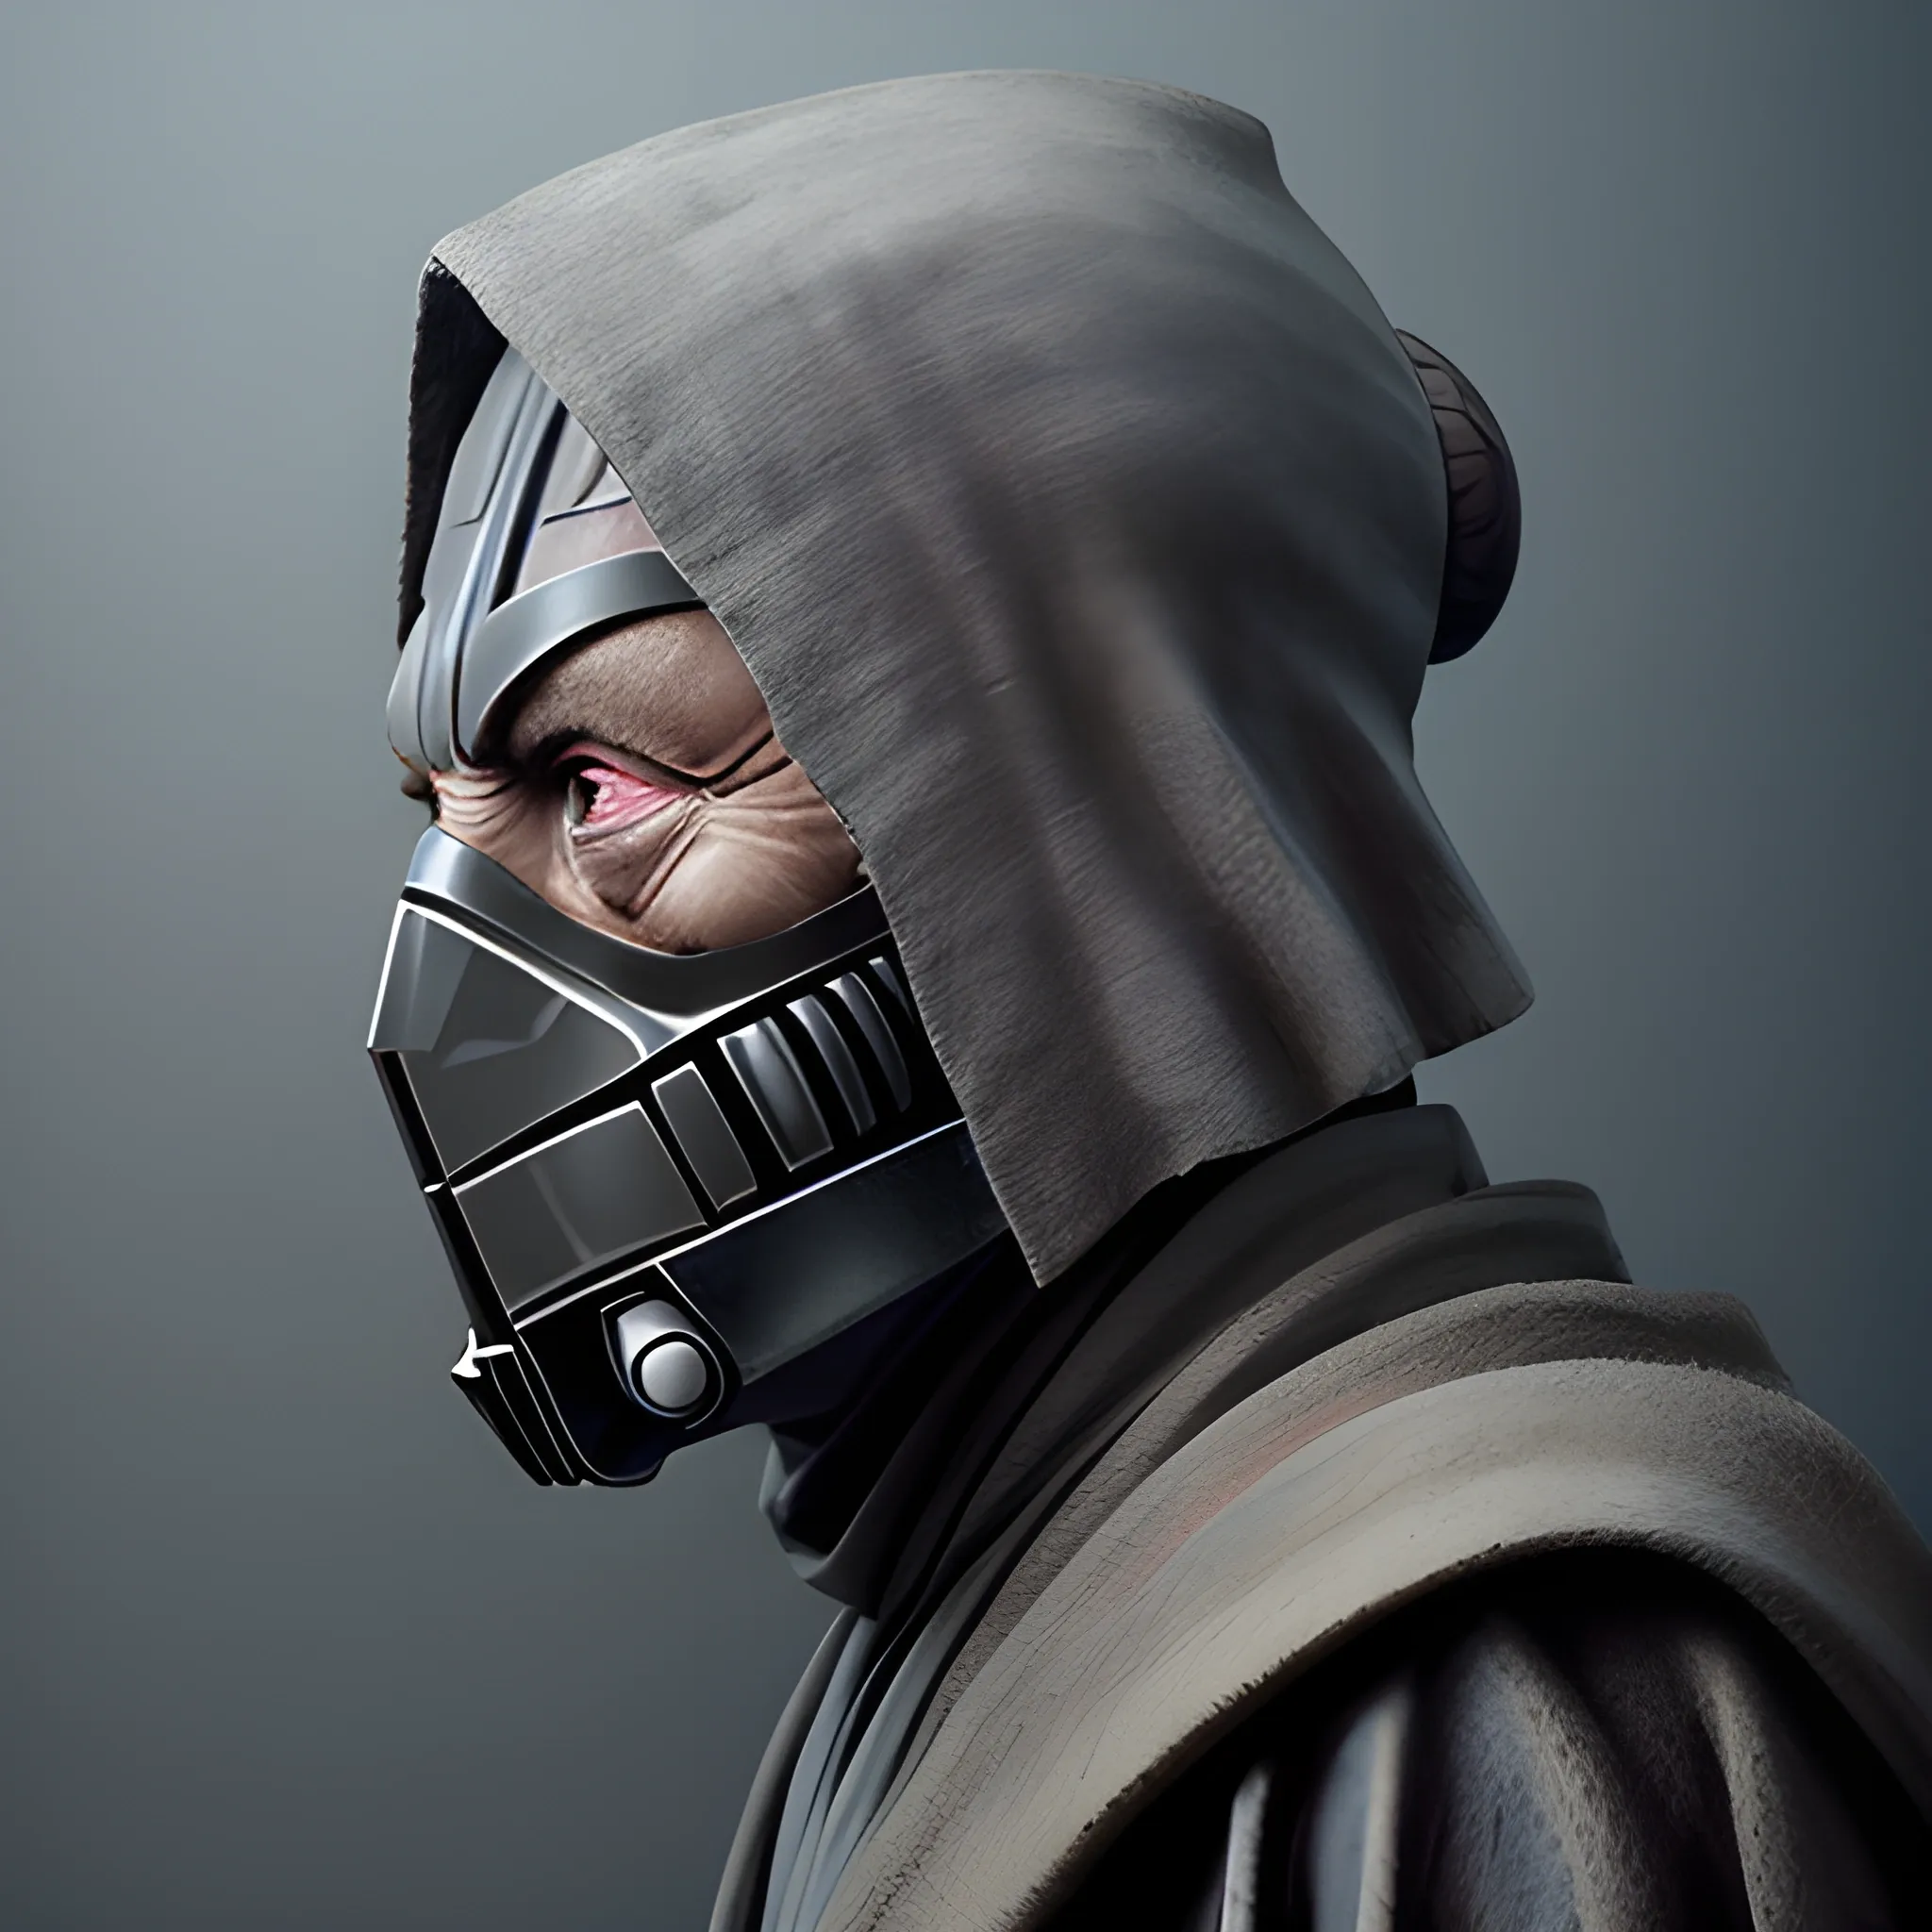 a three-quarter profile view of a character from star wars who is a grey-jedi with very tired eyes, wearing a tattered dark hood with a star wars style face mask that shows their eyes